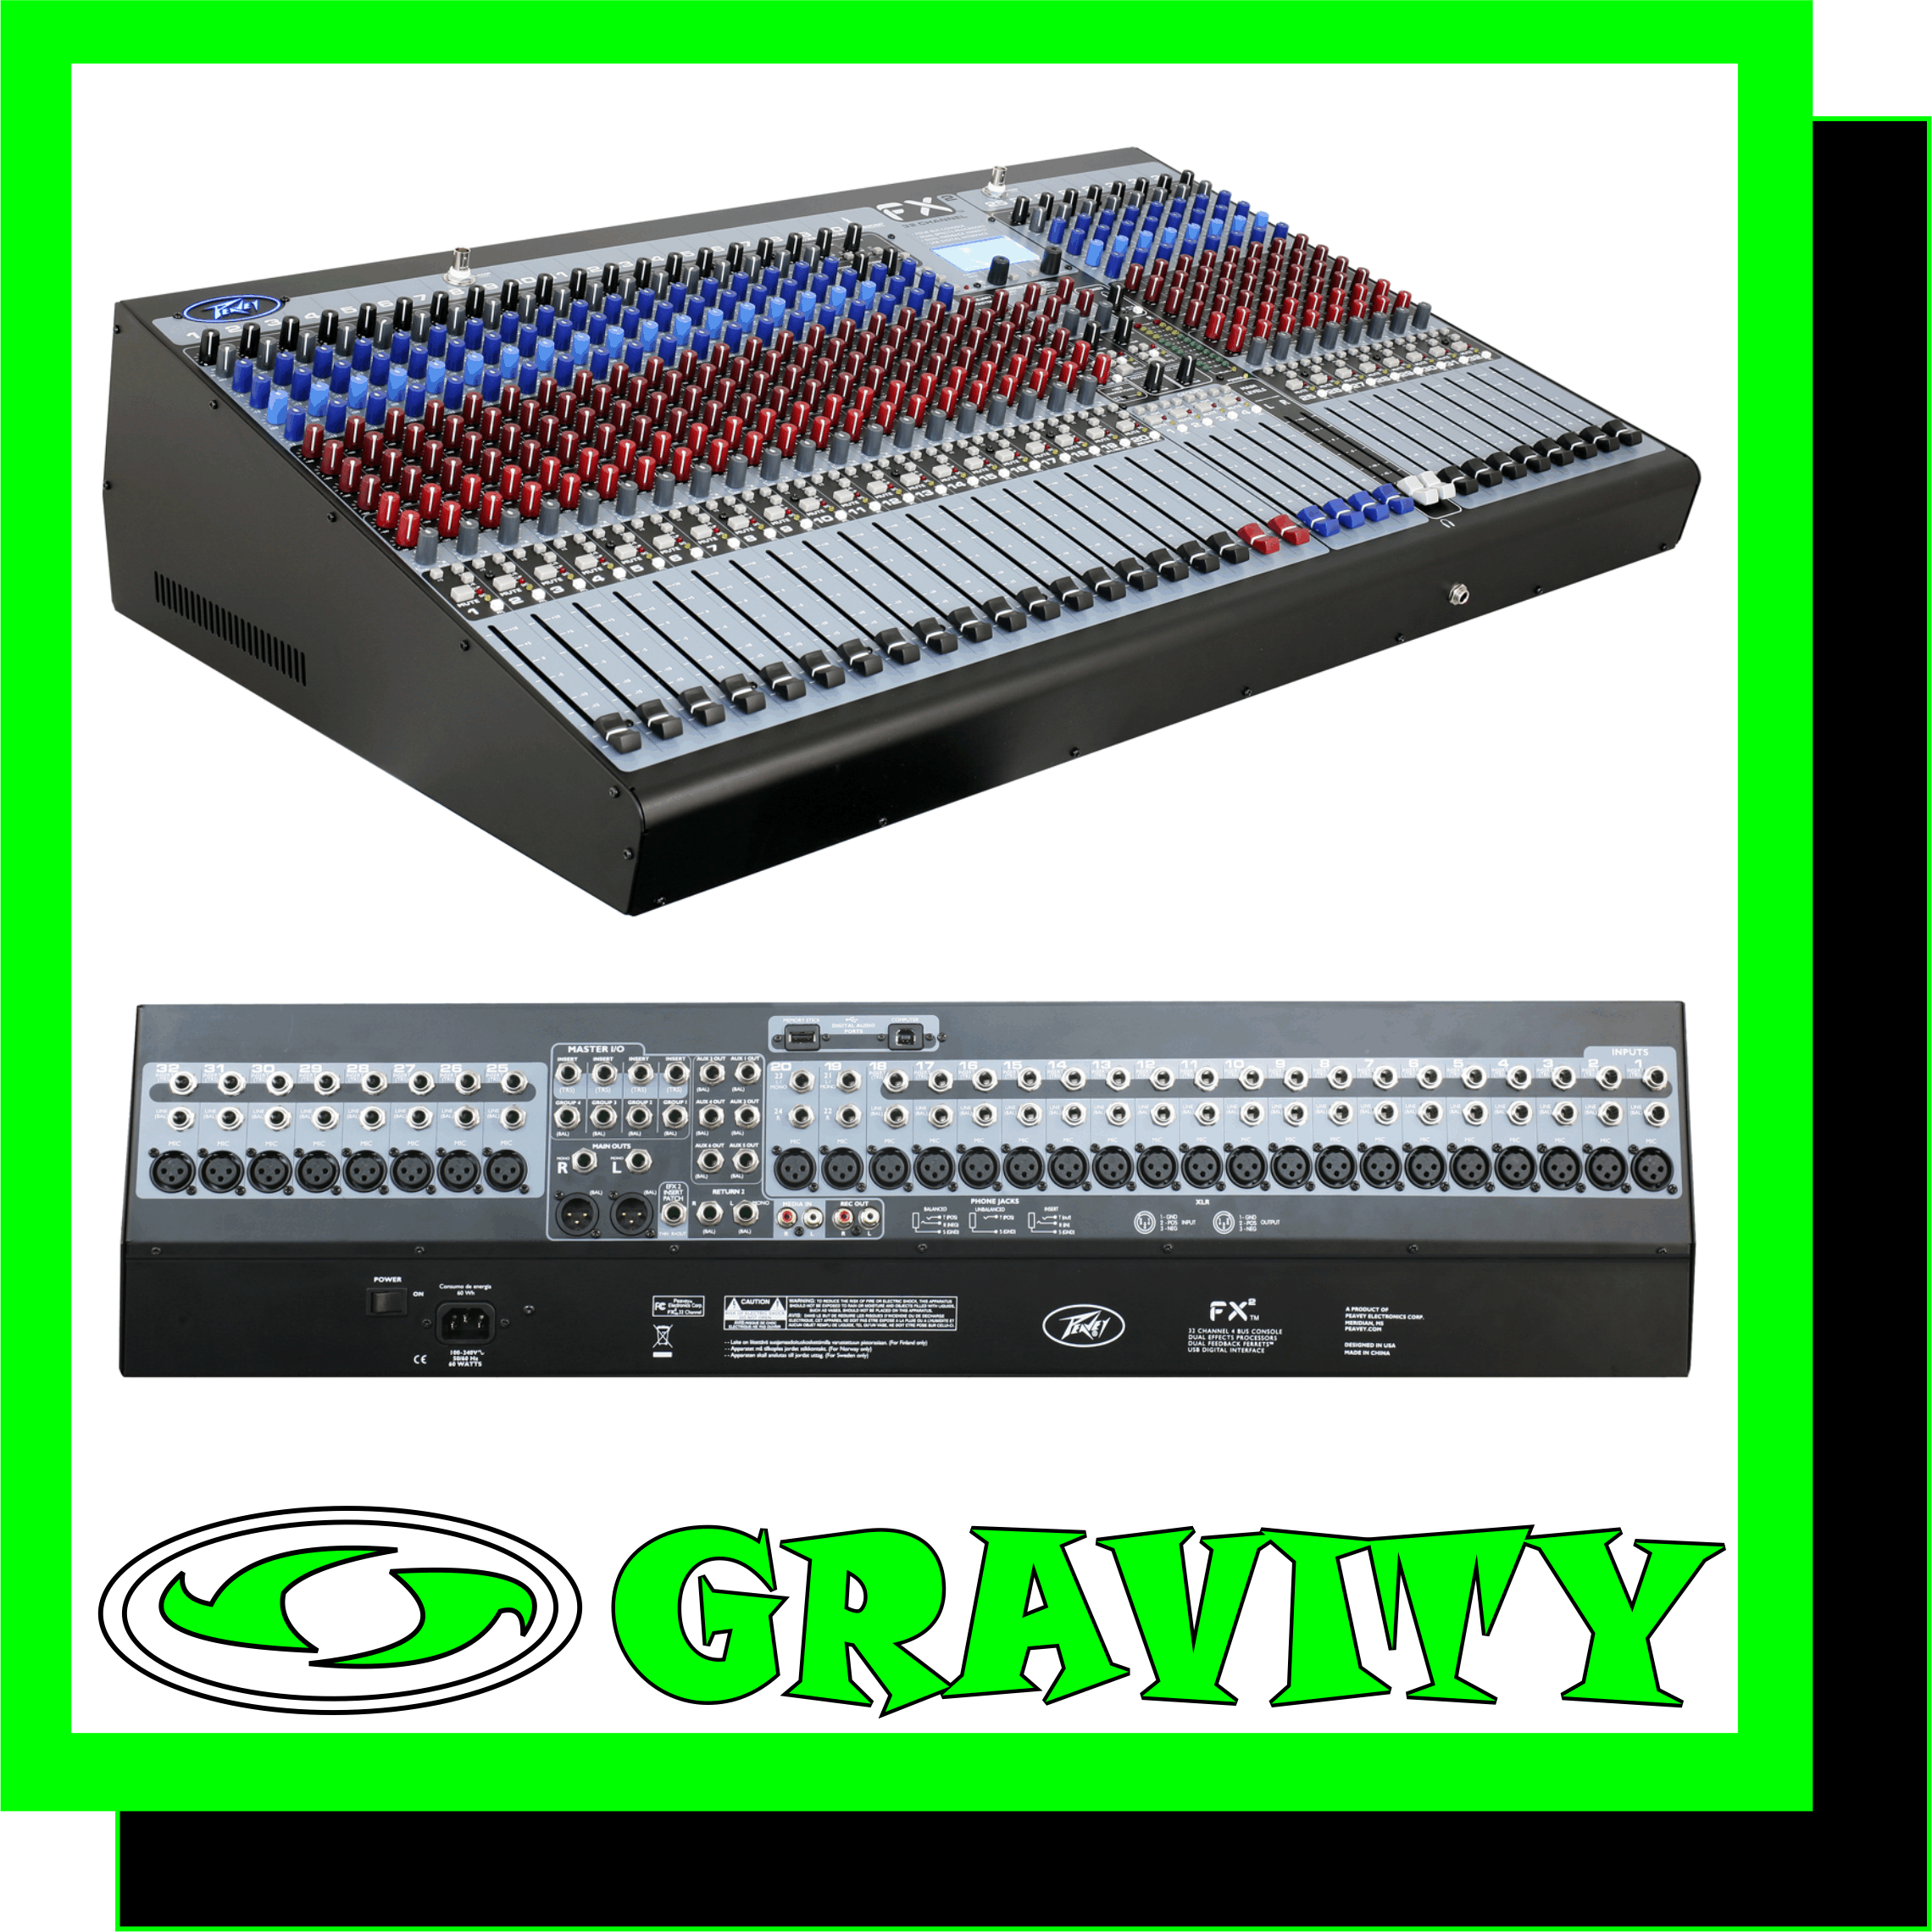 FX™2 32  Features: -High-power dual DSP engine with improved digital effects and output processing including Feedback Ferret®, 28-band GEQ/5-band PEQ, delay and limiter -USB 2.0 "A" connection to record directly to or playback from memory stick -USB 2.0 "B" connection for streaming digital out -3-band EQ with sweepable mid-frequency and variable low cut filters -2 stereo channels with dual mic/line inputs -48 volt phantom power -4 subgroups -100mm faders -Double the processing power of the original FX Series -All new switching power supply design is more efficient than the original -Silencer™ mic preamp XLR inputs -USB 2.0 Streaming Compatibility: Windows XP/Vista/7/8/8.1/10 ; Mac OSX playback only -6 Aux sends -Weight Packed: 45.00 lb(20.412 kg) -Width Packed: 25"(63.5 cm) -Height Packed: 36"(91.44 cm) -Depth Packed: 11.5"(29.21 cm)  Overview: The new FX2 features twice the processing power of the original. FX2 Series mixers feature new, Peavey-exclusive technology to enhance live sound reproduction and project studio recording, including Silencer mic preamps, which allow very high gain with low noise and distortion for crystal-clear signal reproduction. The four pre-fader auxes per channel provide four monitor mixes, while the two post-fader auxes are ideal for adding effects (built-in or outboard). These mixers also include dual DSP engines that allow multiple simultaneous effects assignable to any channel via aux 5/6. Onboard effects include reverb, reverb enhanced, delay, compression, expander, de-esser, chorus, flanger, tube emulator, vocal enhancer and gate. Chain two processors together on each of the two available effects windows. The digital output processing section includes Feedback Ferret®, dual 5-band Parametric EQ or dual 28-band Graphic EQs, digital delay lines, and dynamics/limiters. The output section can be configured for Stereo, Dual Mono or Subwoofer mode with a built-in electronic crossover. The mixer features dual USB 2.0 ports, and the "A" USB connector allows streaming of digital audio directly to a computer or memory stick as well as exclusive, built-in MP3 compression. You can record your rehearsals, songwriting sessions or live performances directly to an inexpensive USB stick ... no other hardware needed and then transfer them to your computer to burn CDs or to transmit electronically. Or insert a memory stick to playback audio files for use between sets.